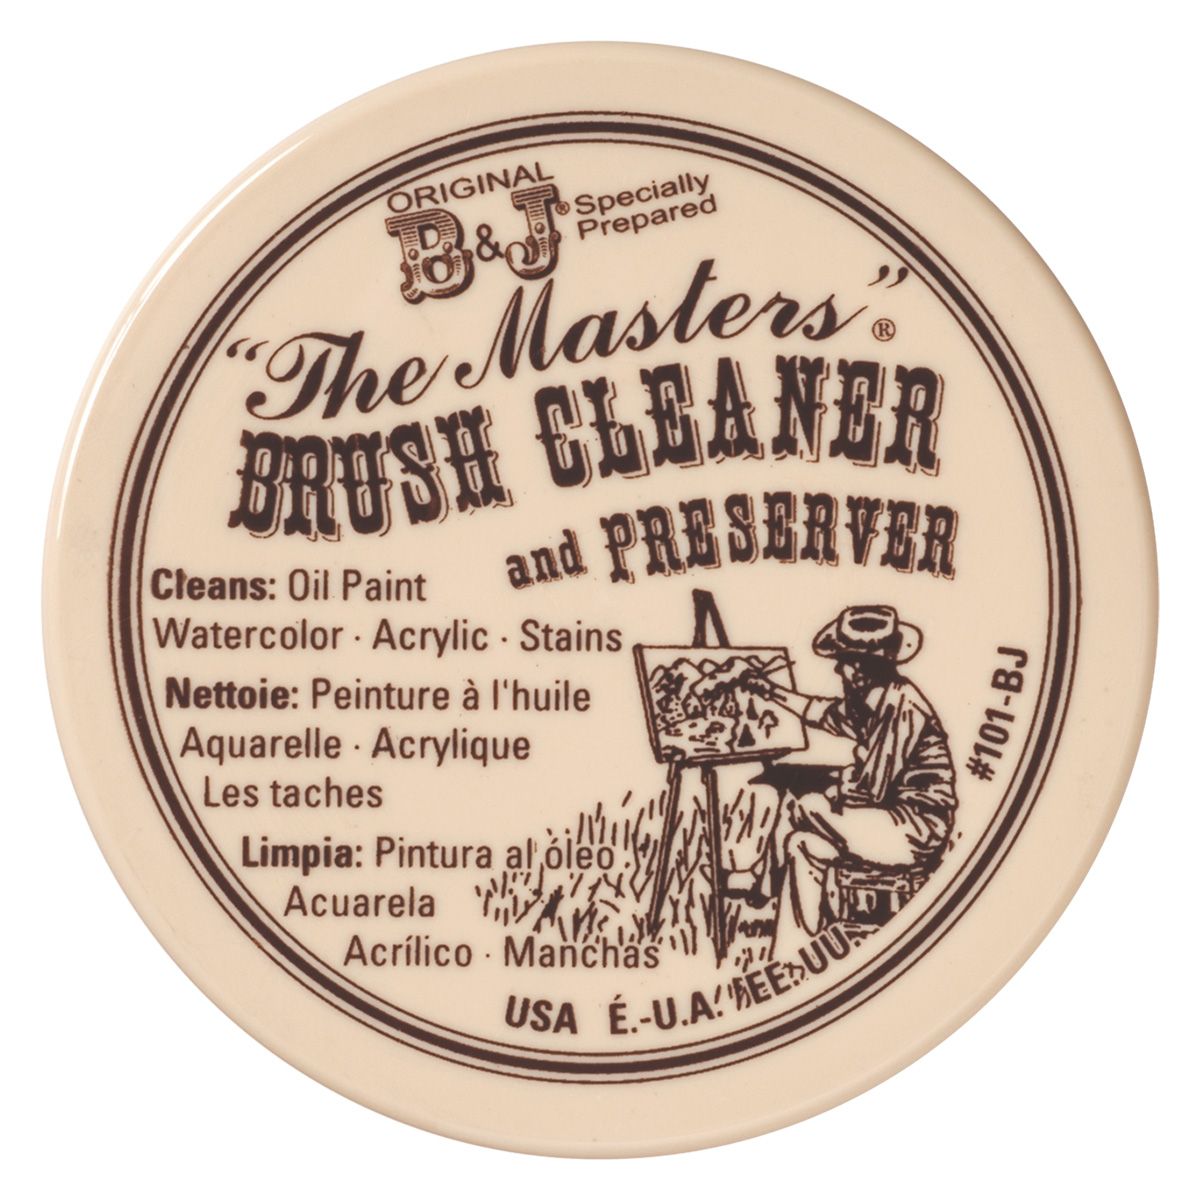 The Masters Brush Cleaner @ Raw Materials Art Supplies